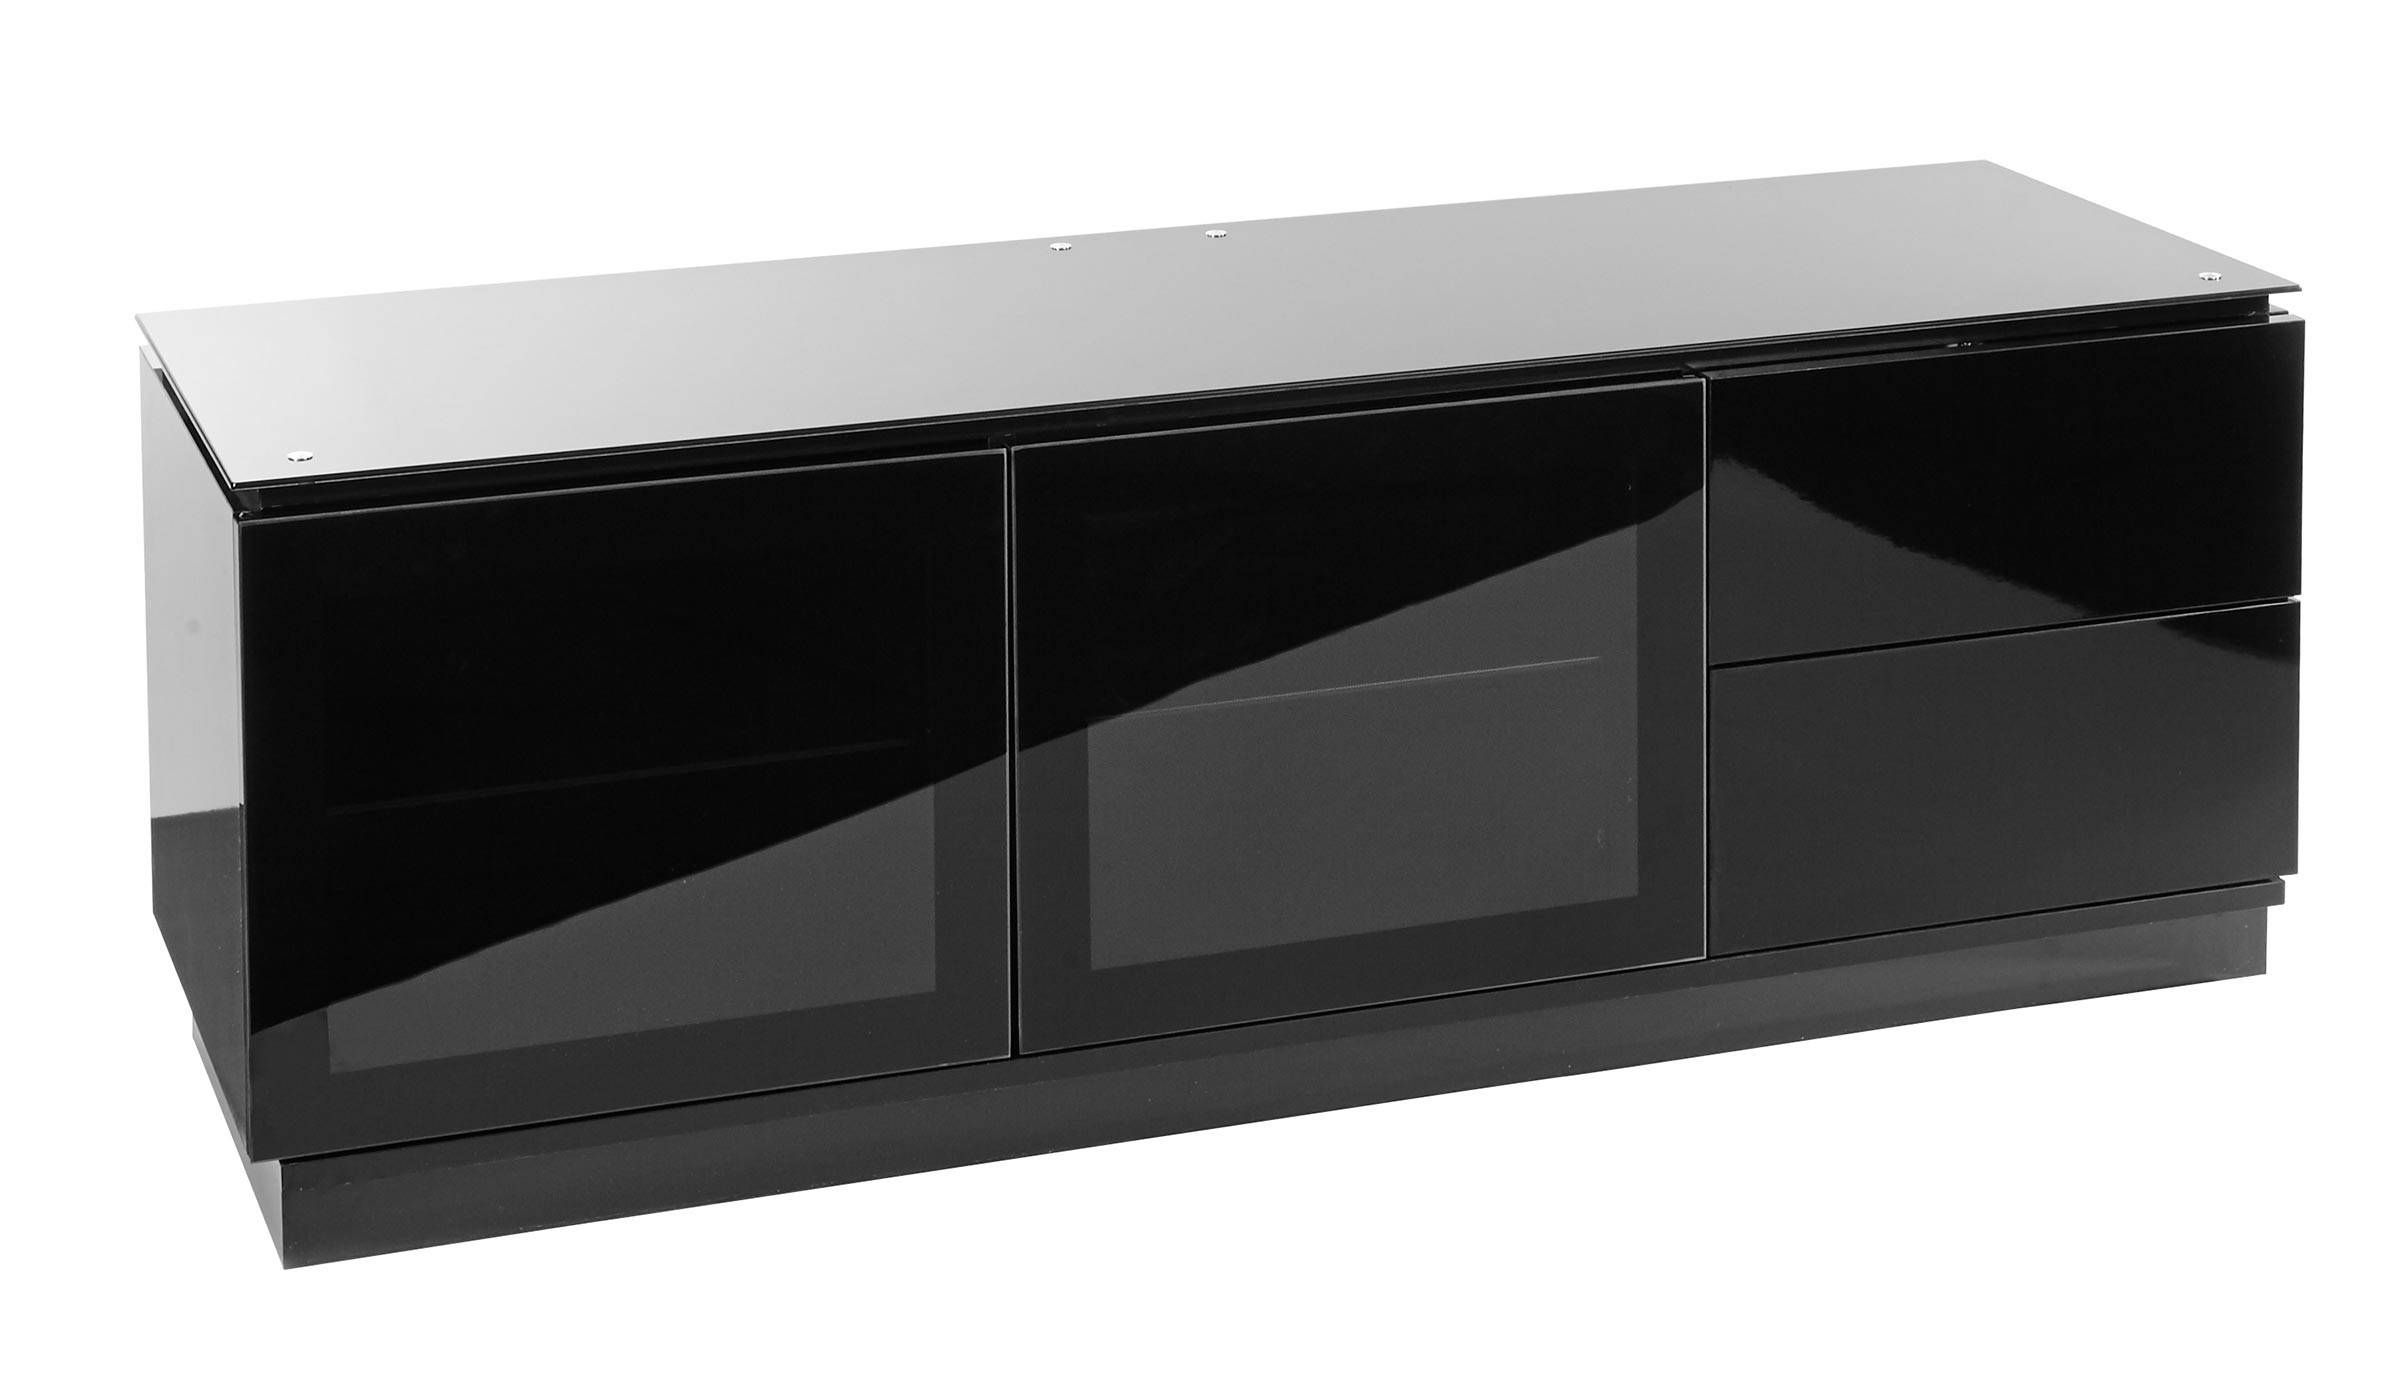 Black Gloss Tv Cabinet Up To 65" Tv | Casino Mmt C1500b Inside Black Tv Cabinets With Doors (View 1 of 15)